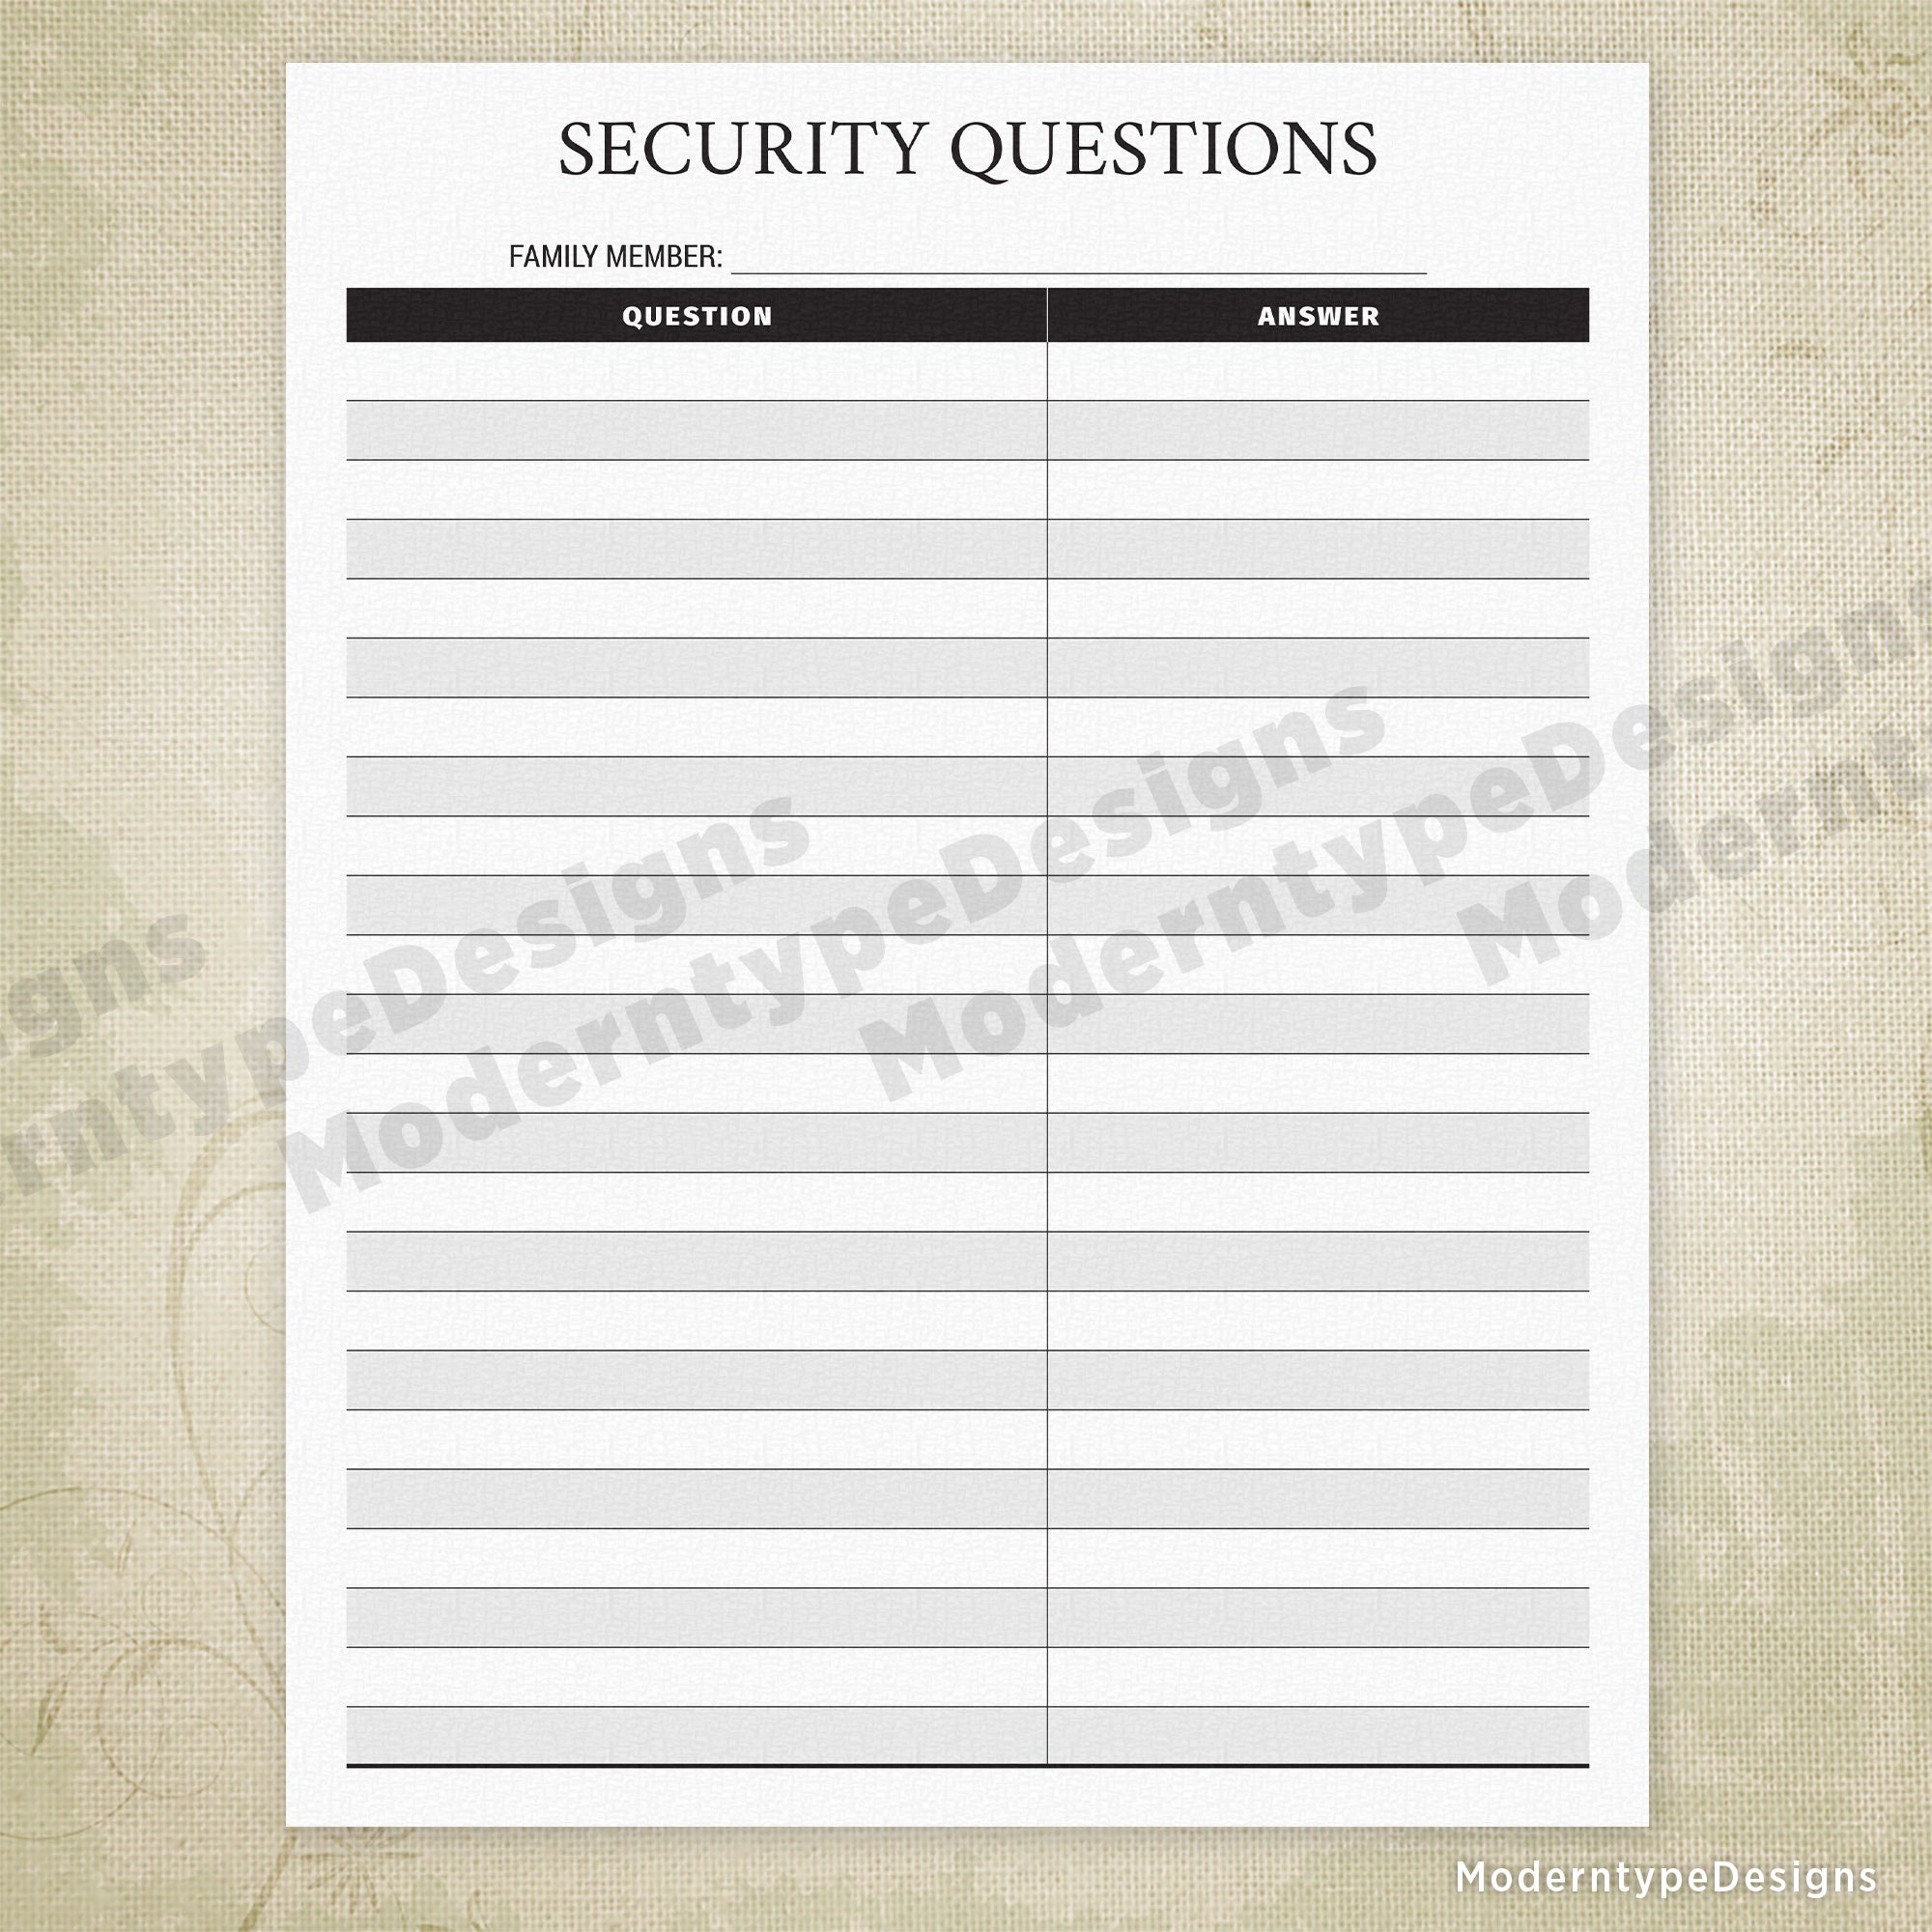 Internet Passwords & Security Questions Printable - End of Life